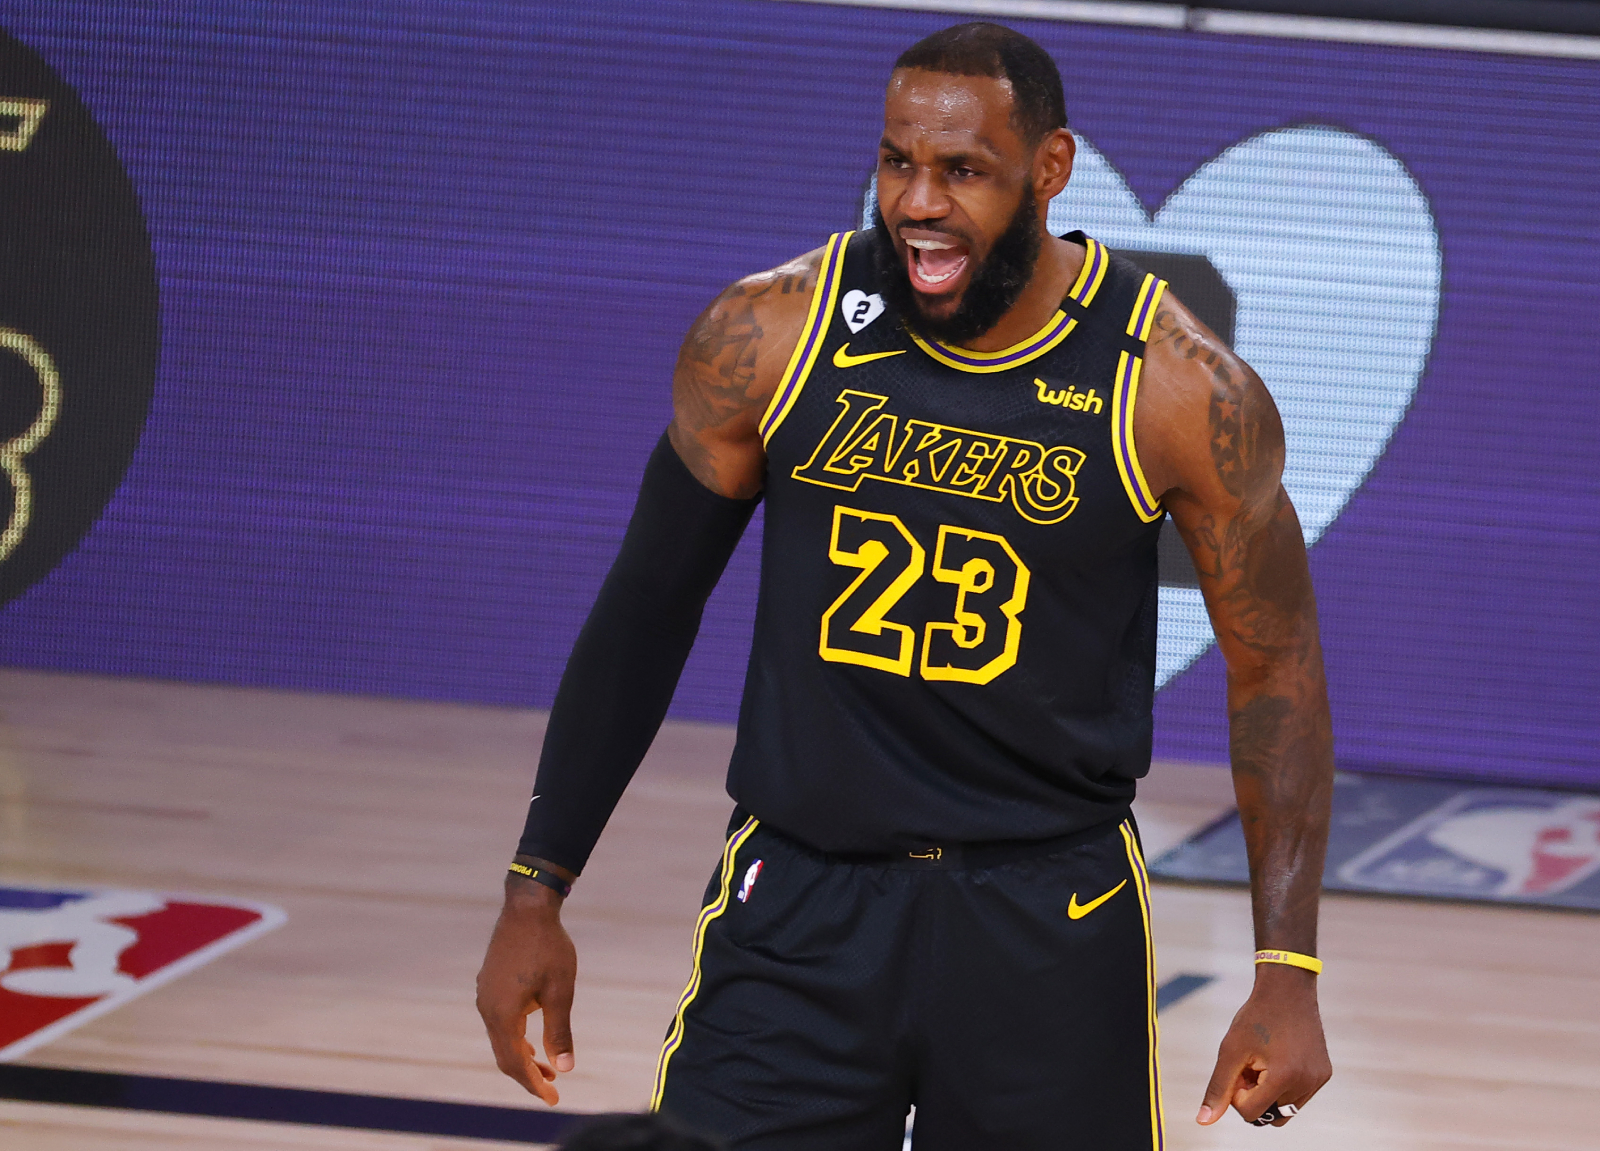 LeBron James has been unstoppable for the Lakers in his most recent playoff games. In fact, his former teammates are in awe of him.